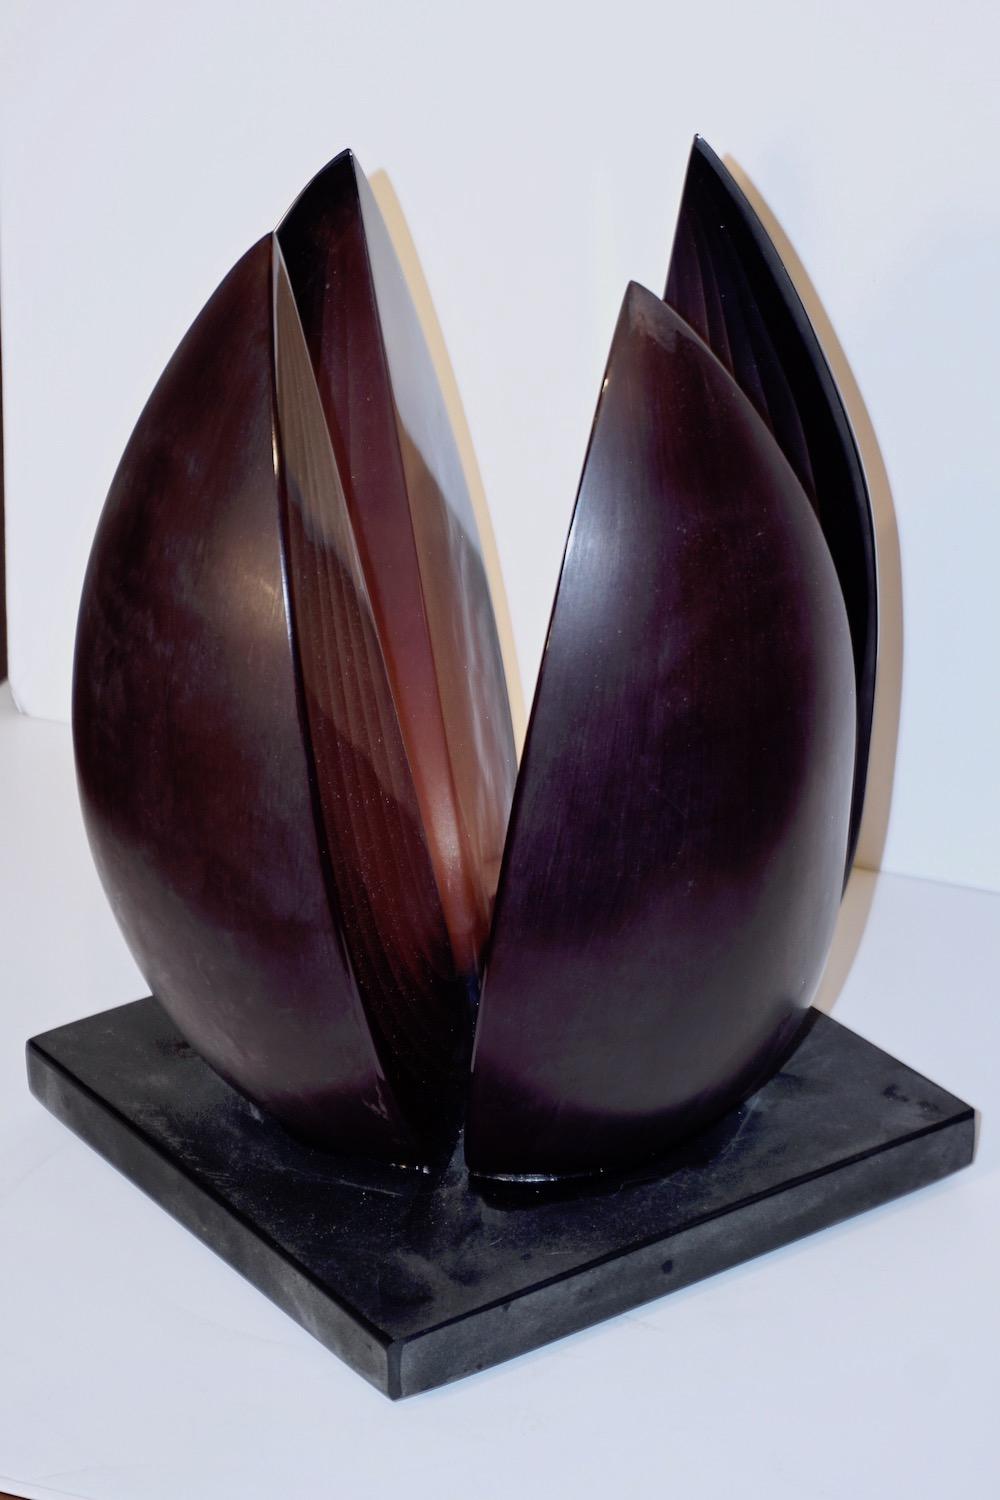 A. Barbaro Abstract Flower Sculpture in a Dark Plum Murano Glass on Slate Base 1